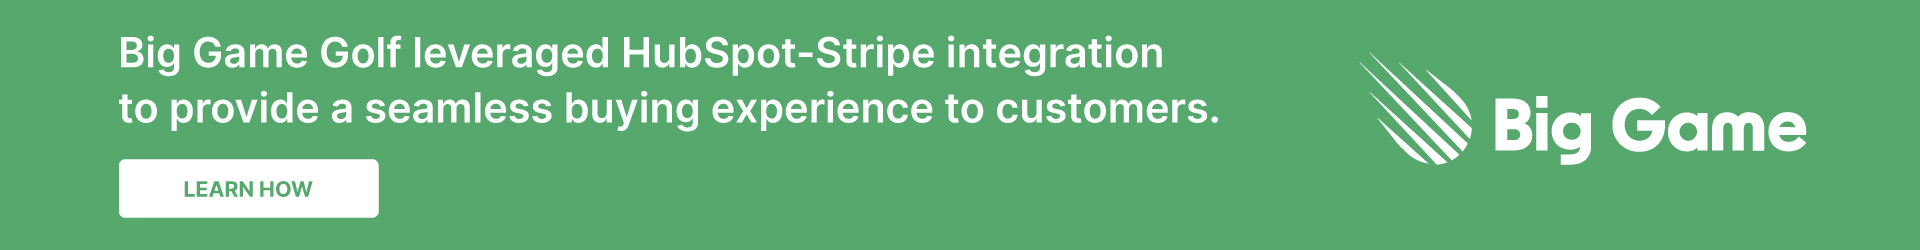 Banner text: Big Game Golf leveraged HubSpot-Stripe integration to provide a seamless buying experience to customers. Learn how.